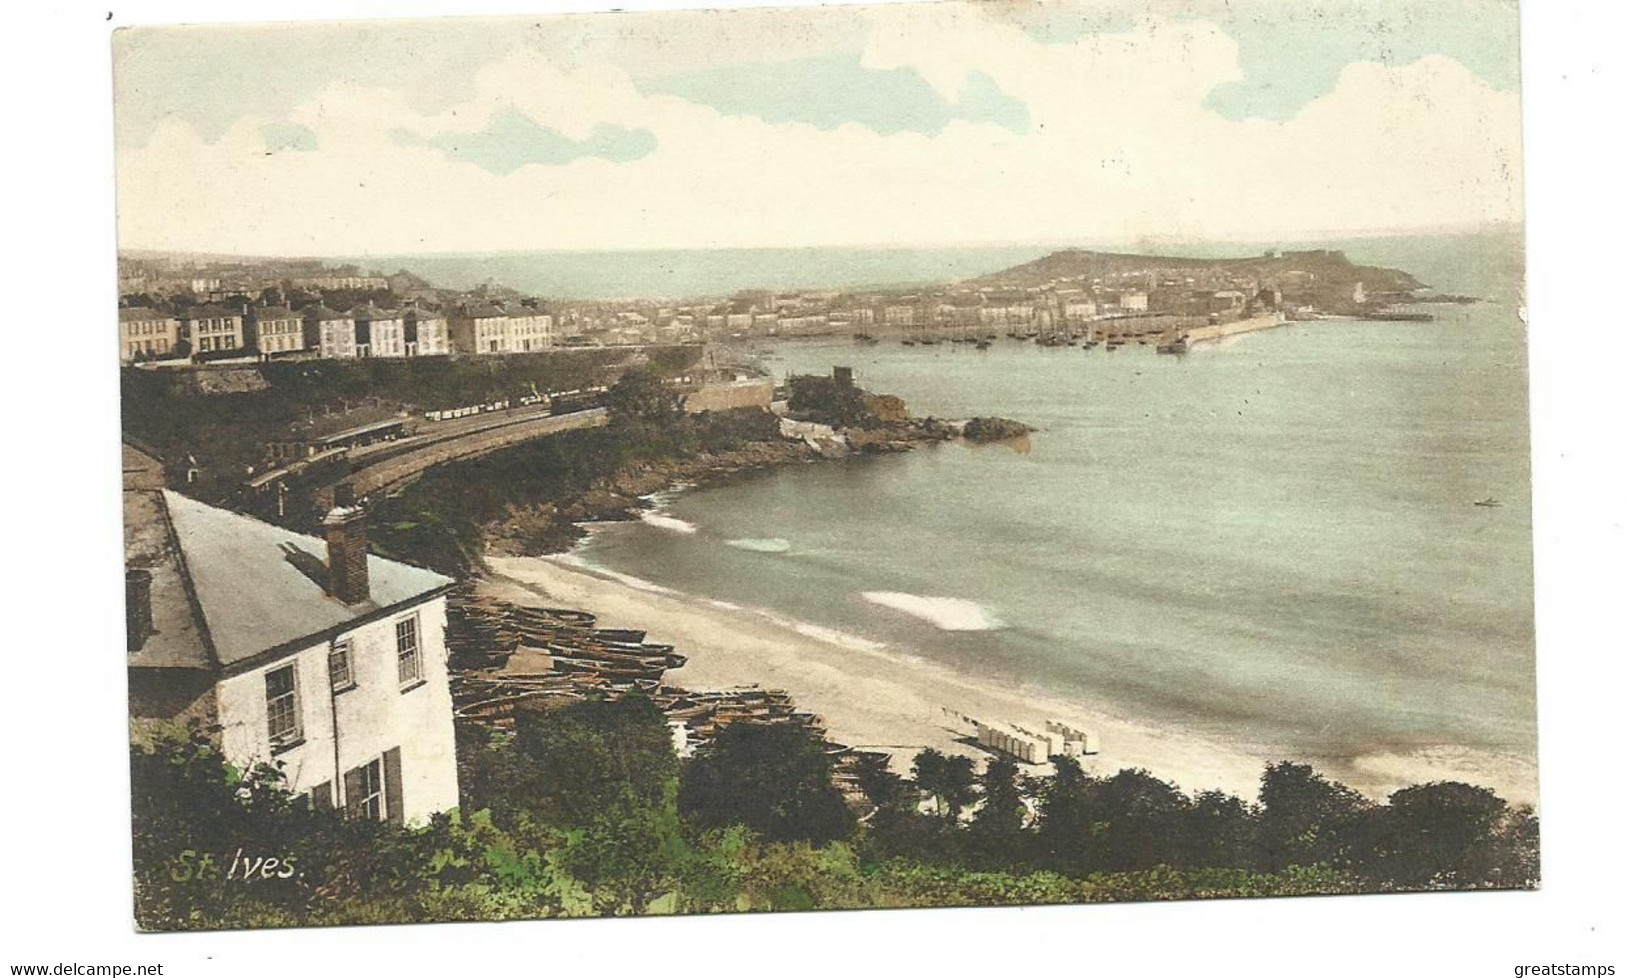 Cornwall  Postcard St.ives  Frith's   Unused Nice Card - St.Ives